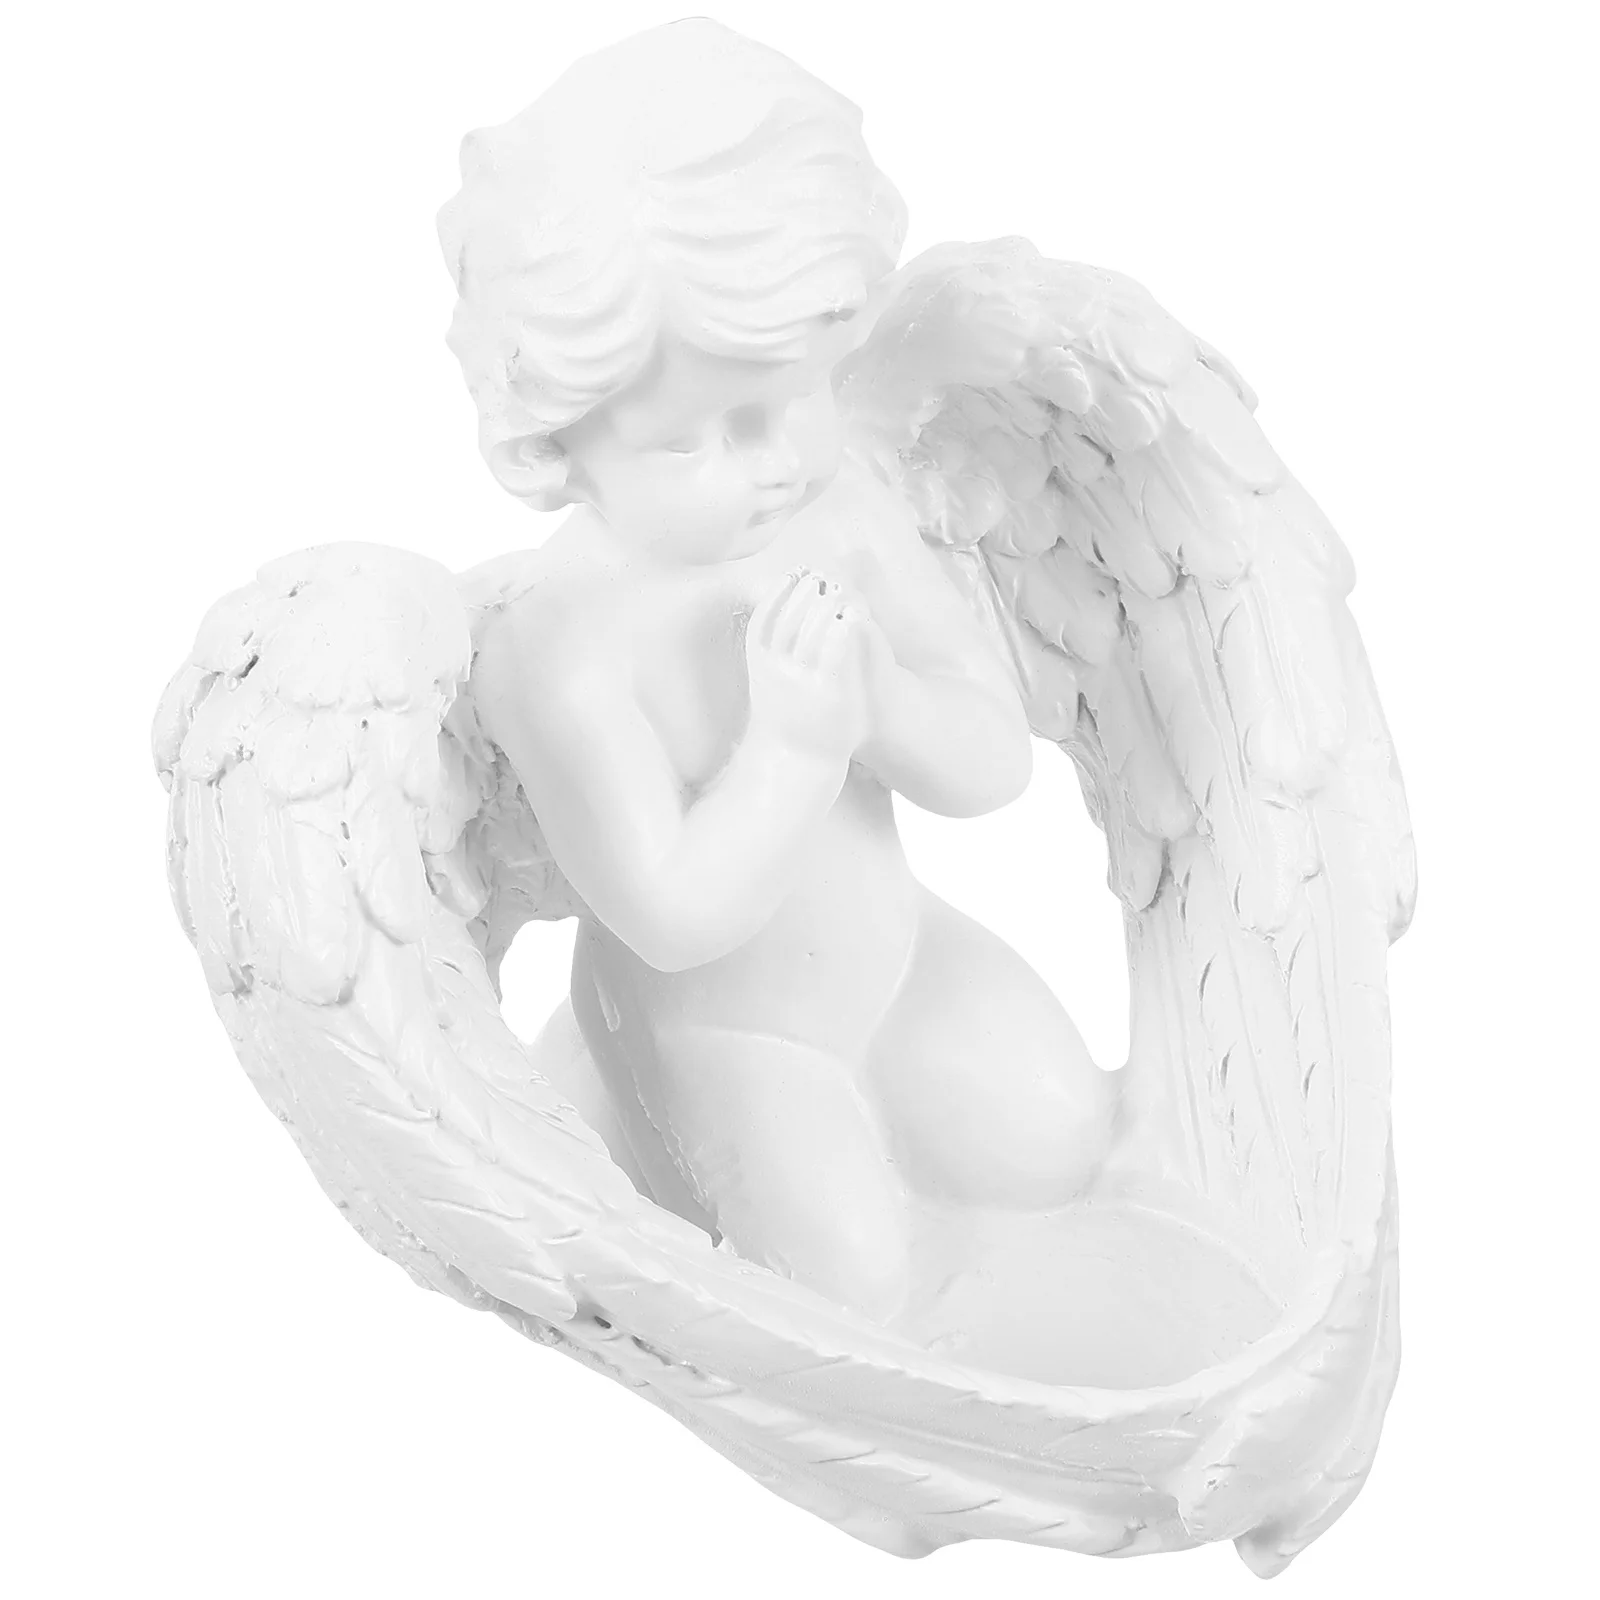 

Angel Wings Candlestick Tealights Resin Holders Decorative Table Centerpiece Decorations Living Room Unique Pillar Window